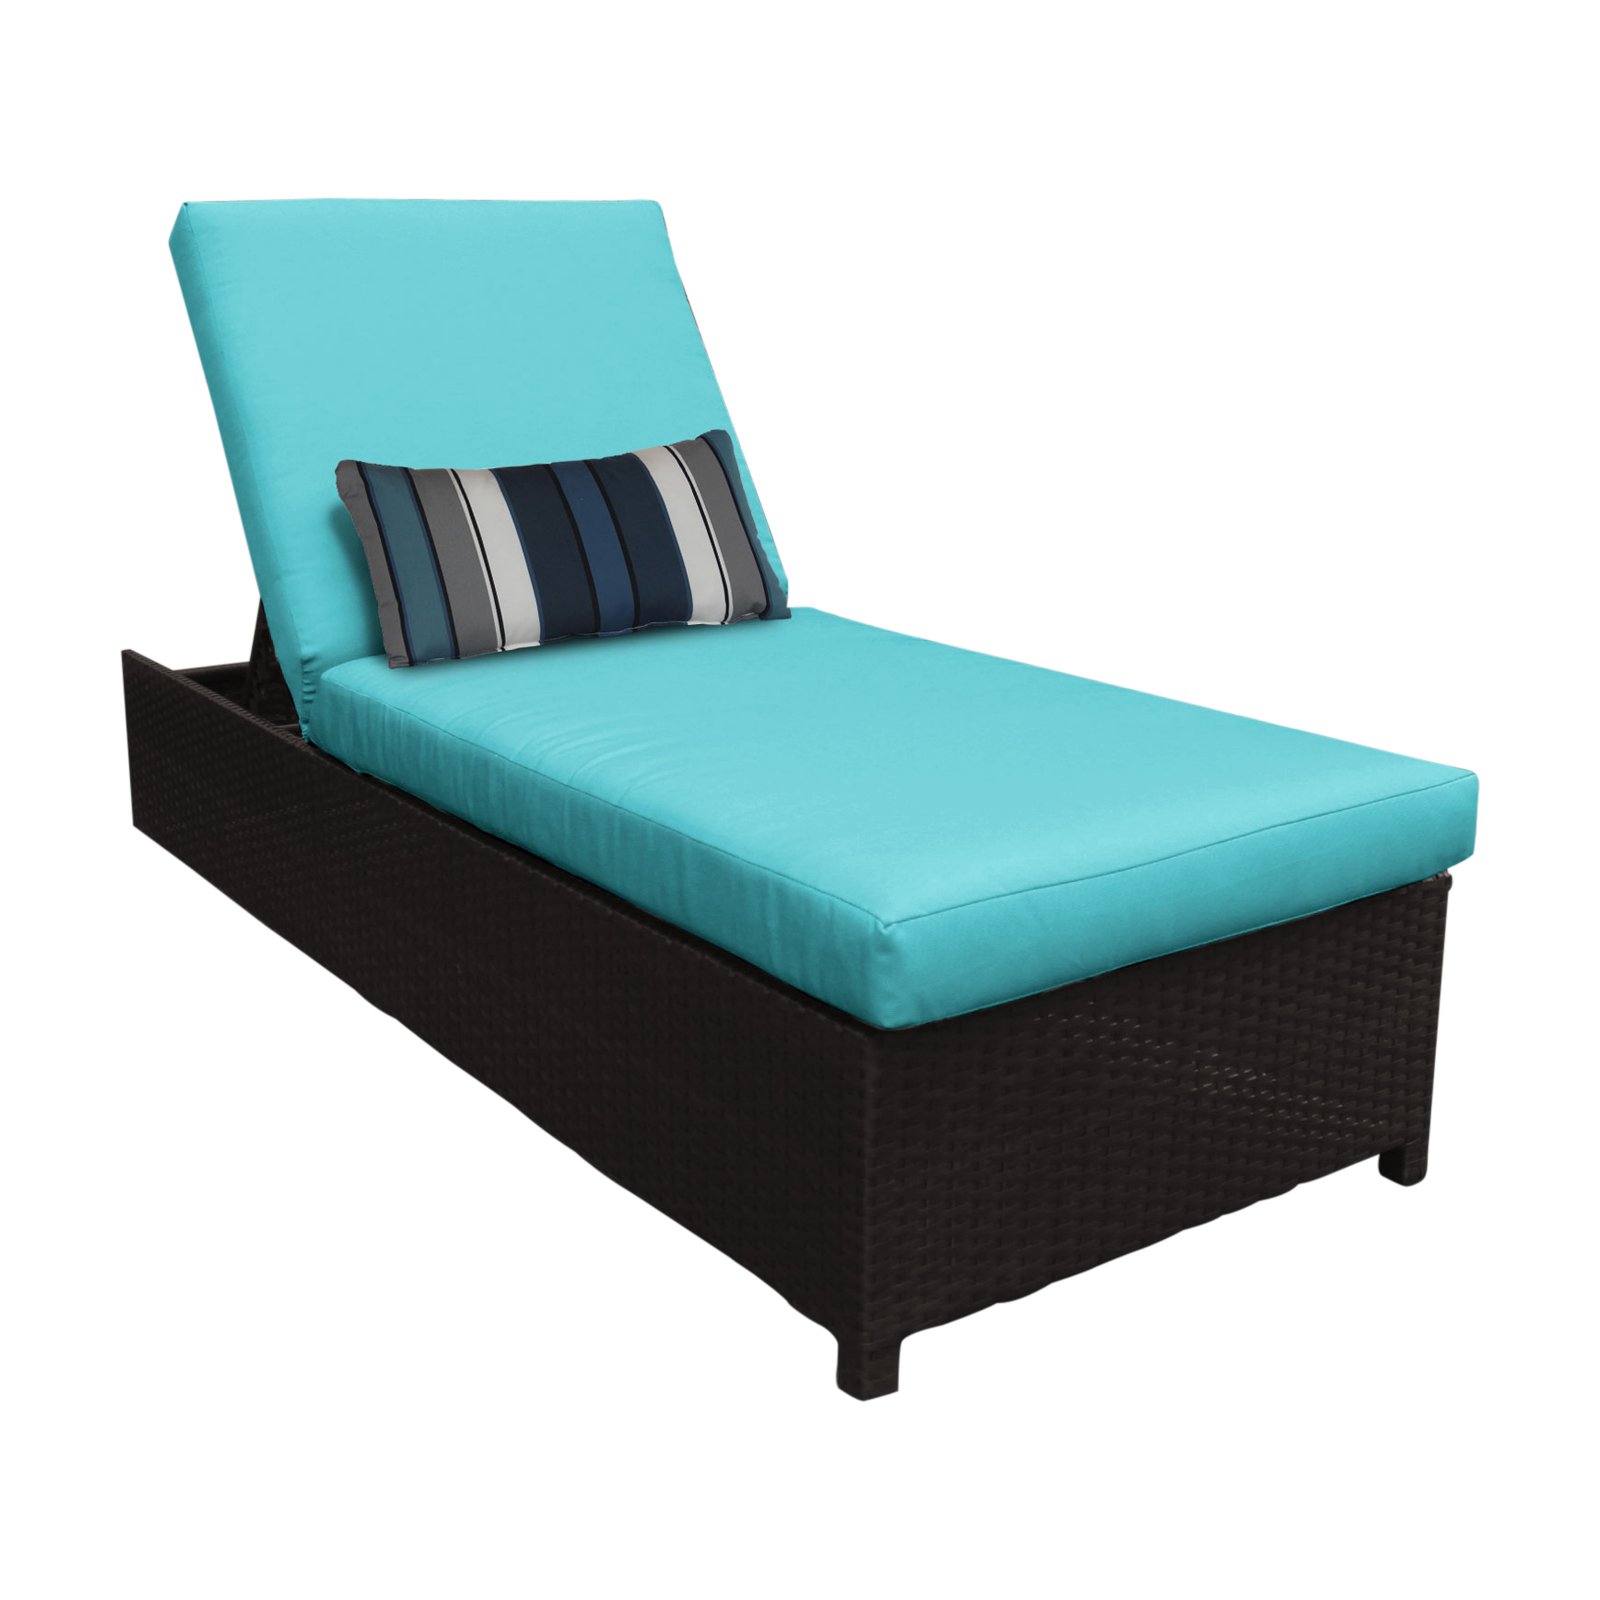 TK Classics Belle Wheeled Wicker Outdoor Chaise Lounge Chair - image 2 of 11